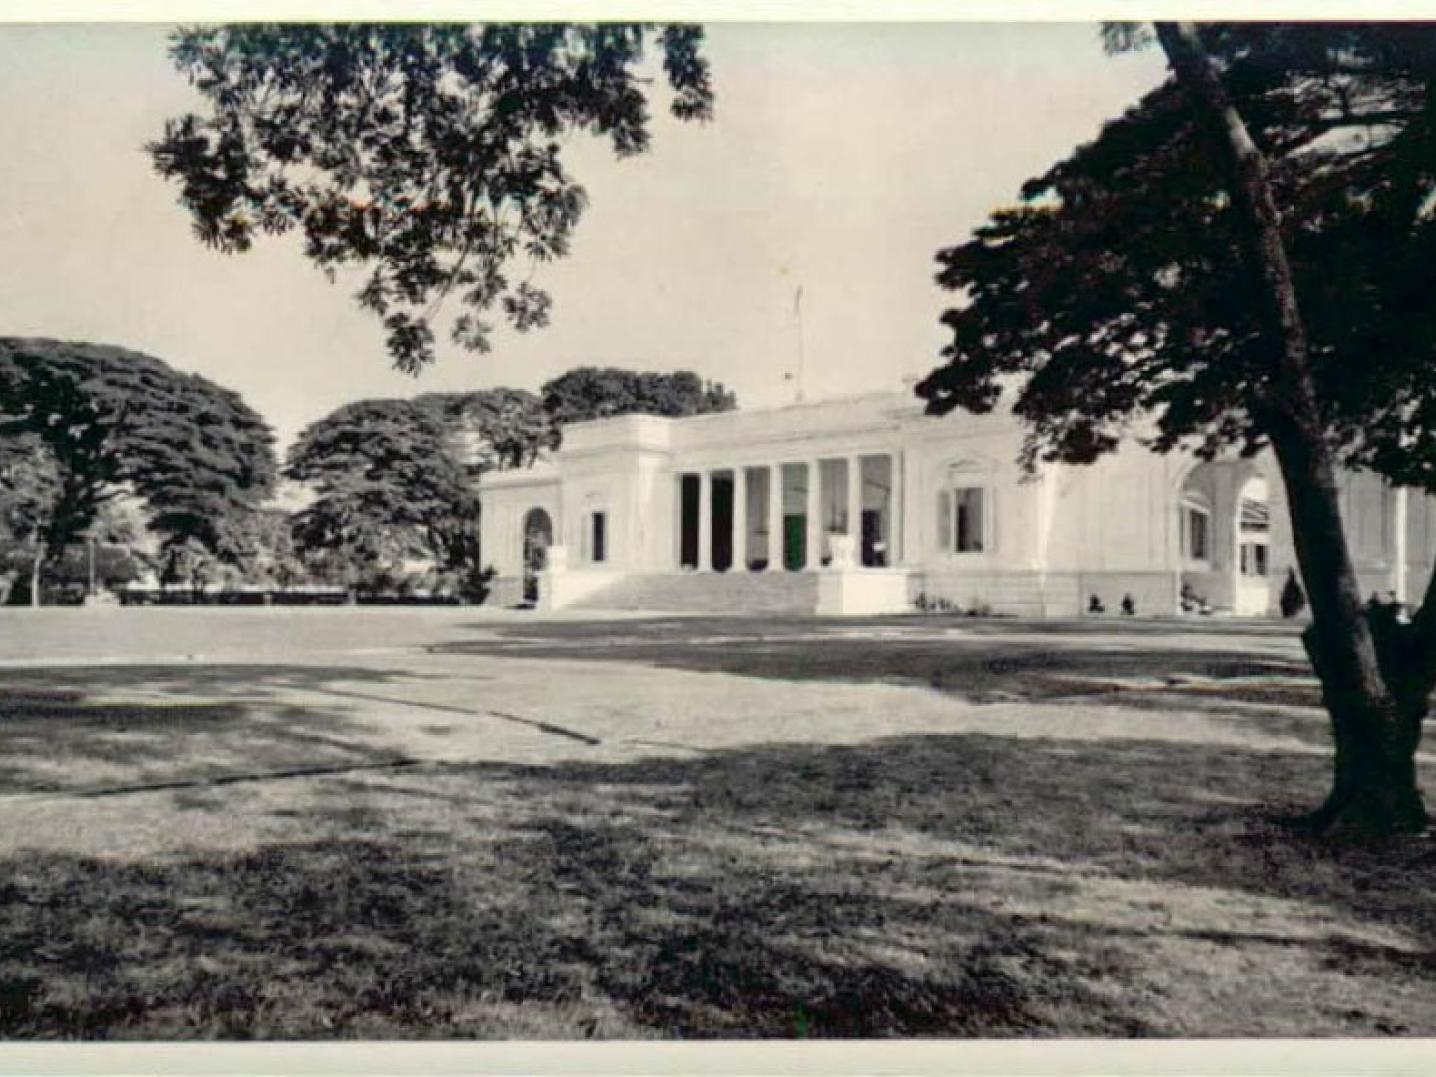 a large white palace in a park in the 1950s